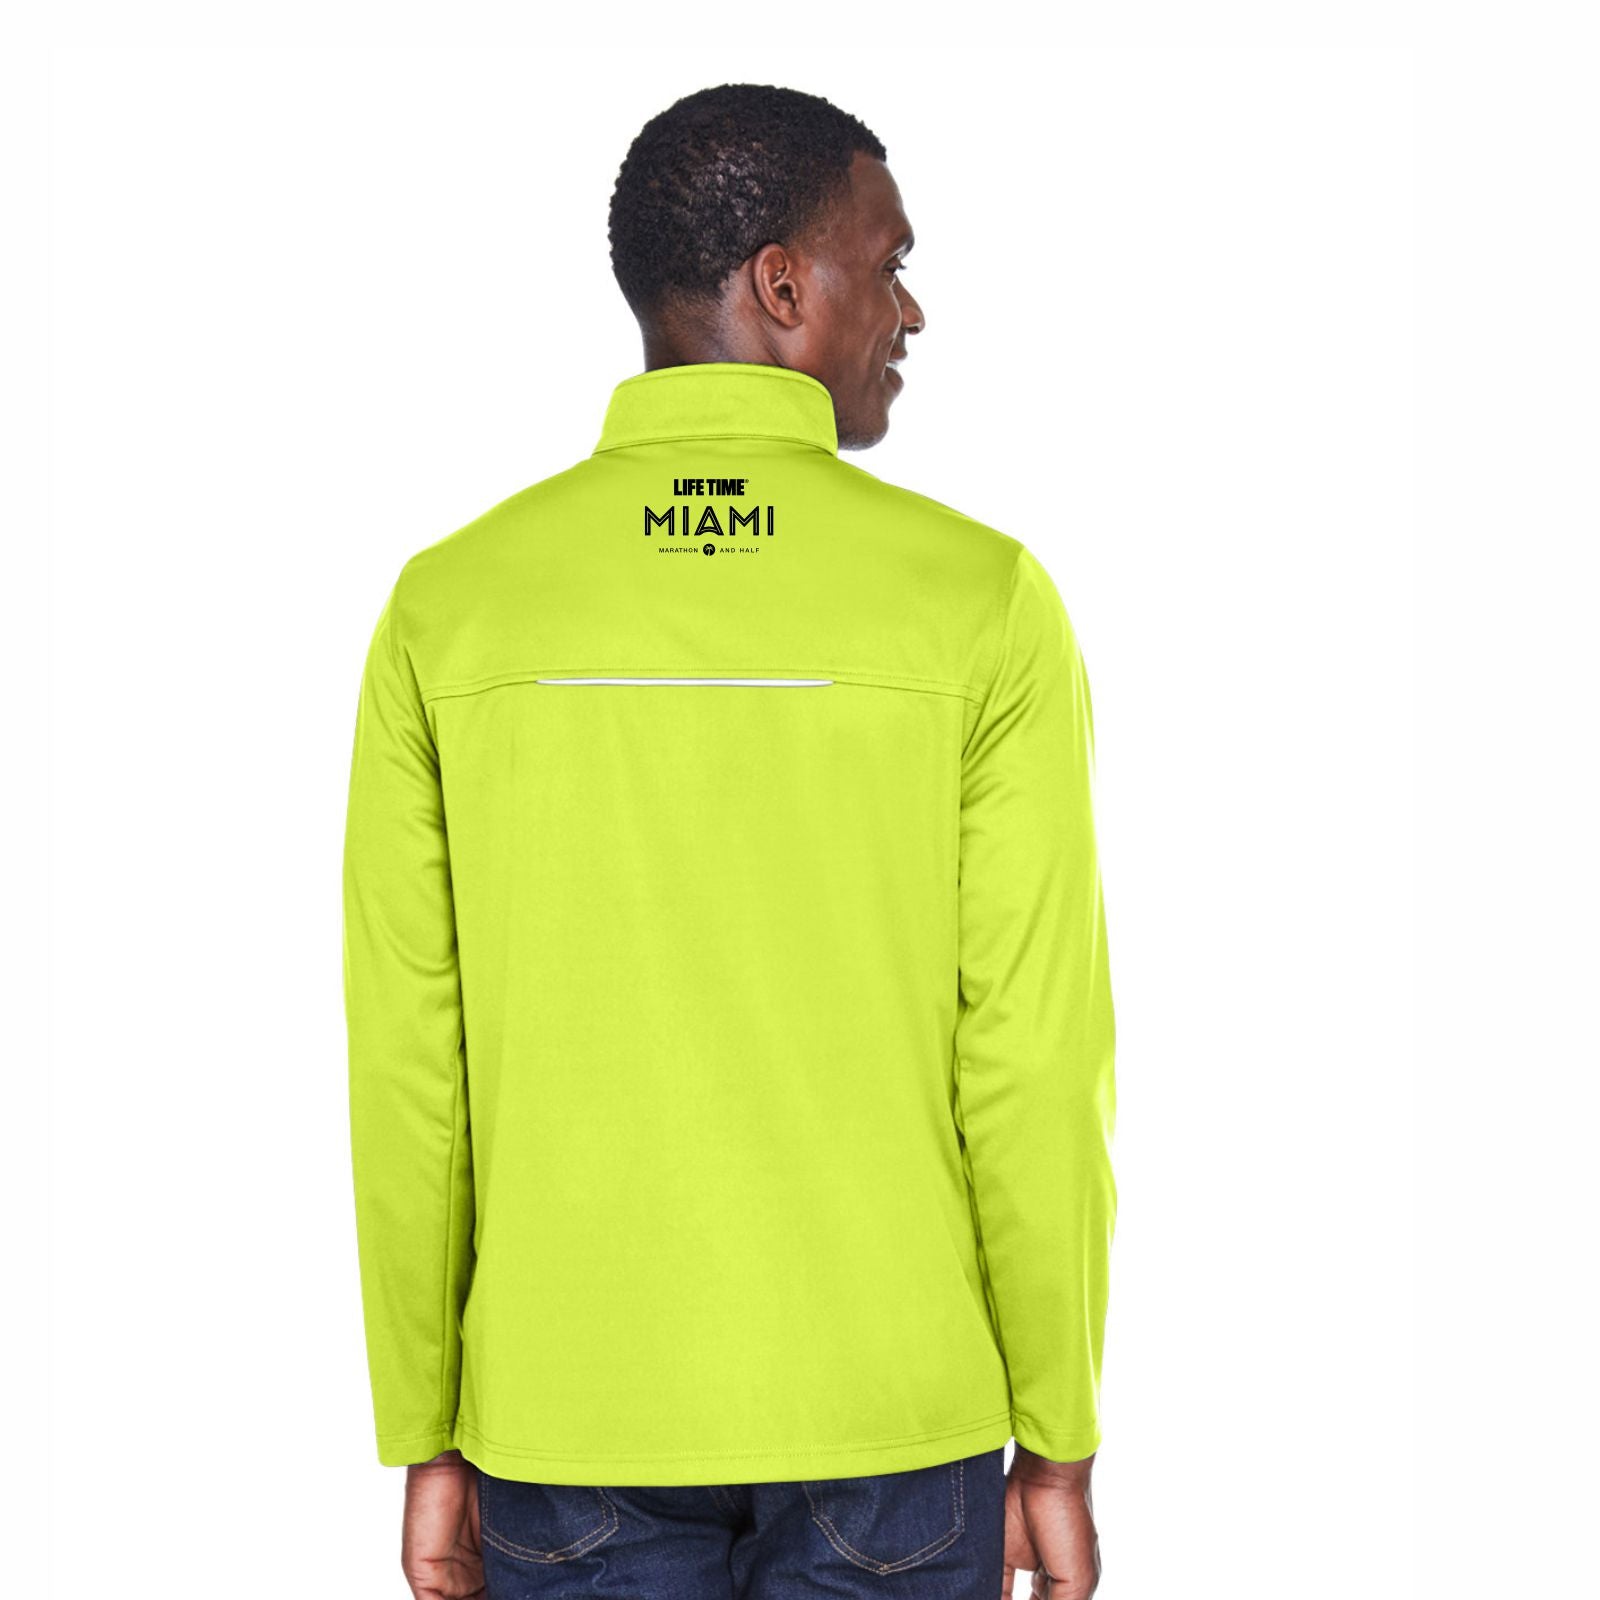 Men's Bonded Zip DWR Shell -Safety Yellow- Embr